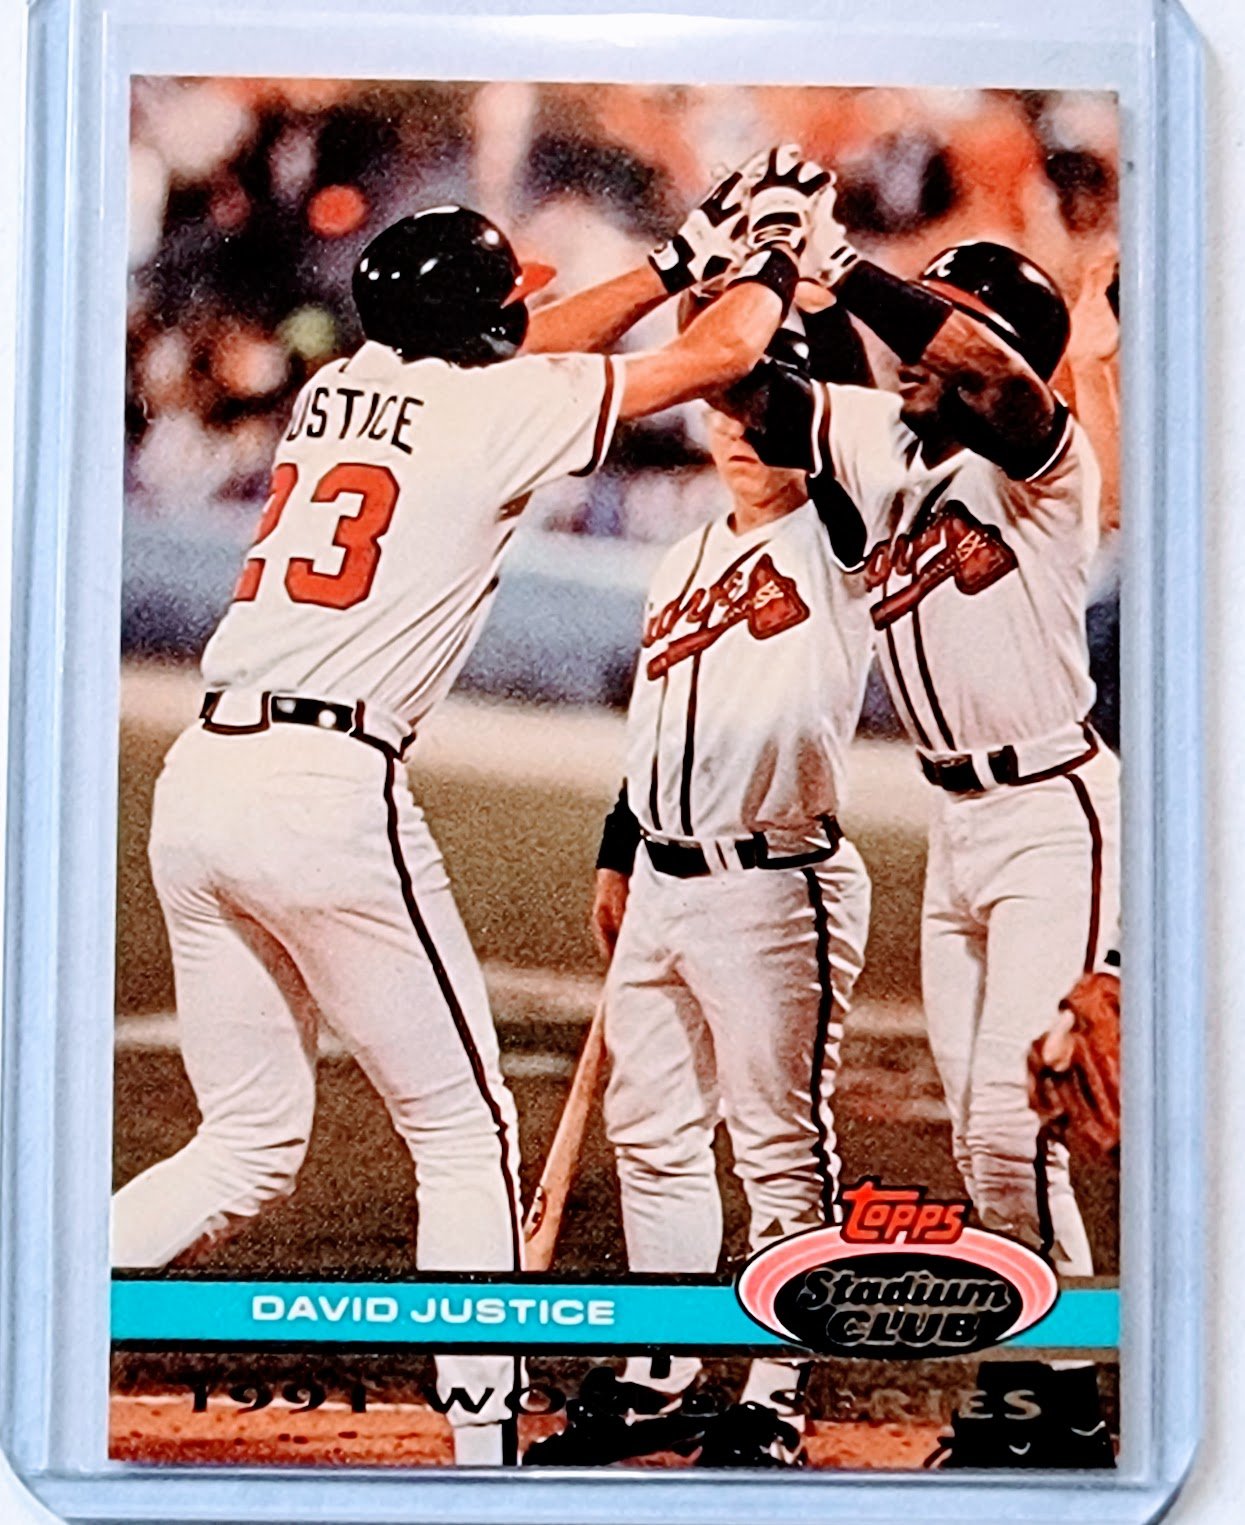 1992 Topps Stadium Club Dome David Justice 1991 World Series MLB Baseball Trading Card TPTV simple Xclusive Collectibles   